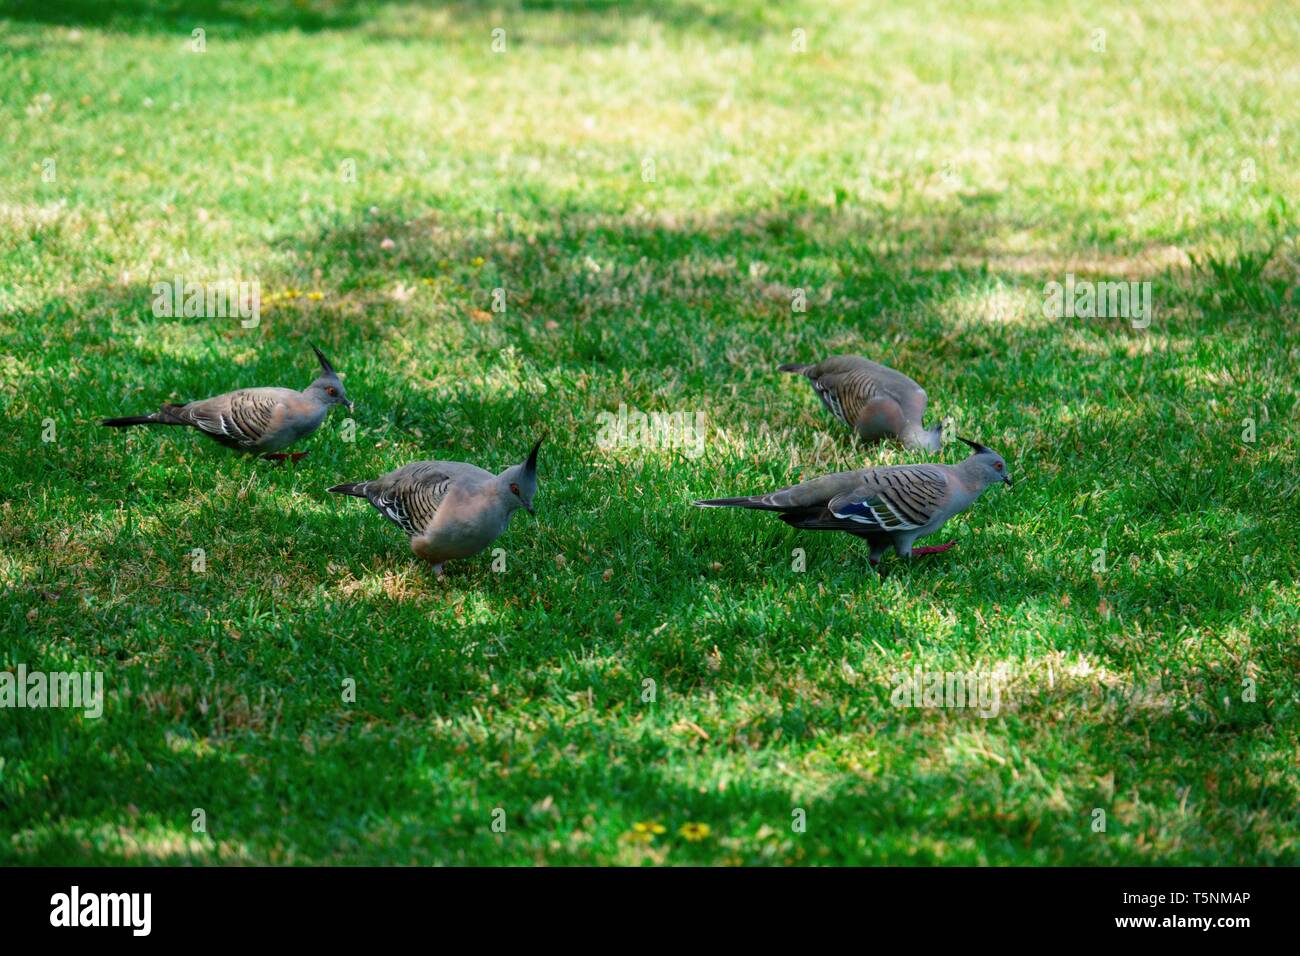 Group of crested pigeons grazing on a grassy lawn Stock Photo